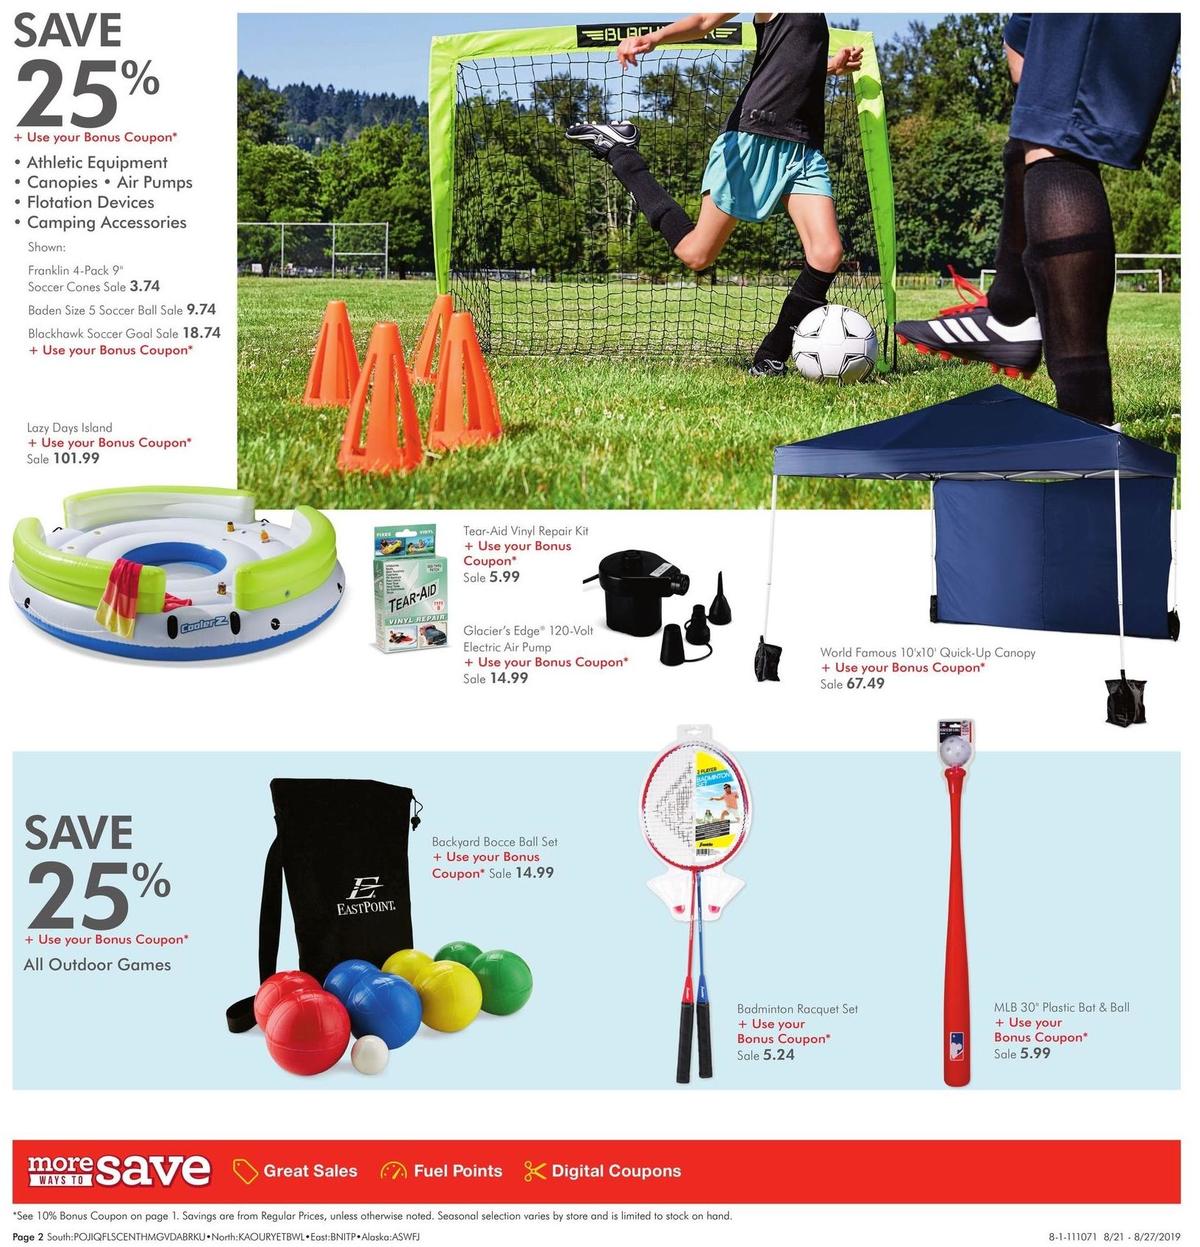 Fred Meyer General Merchandise Weekly Ad from August 21